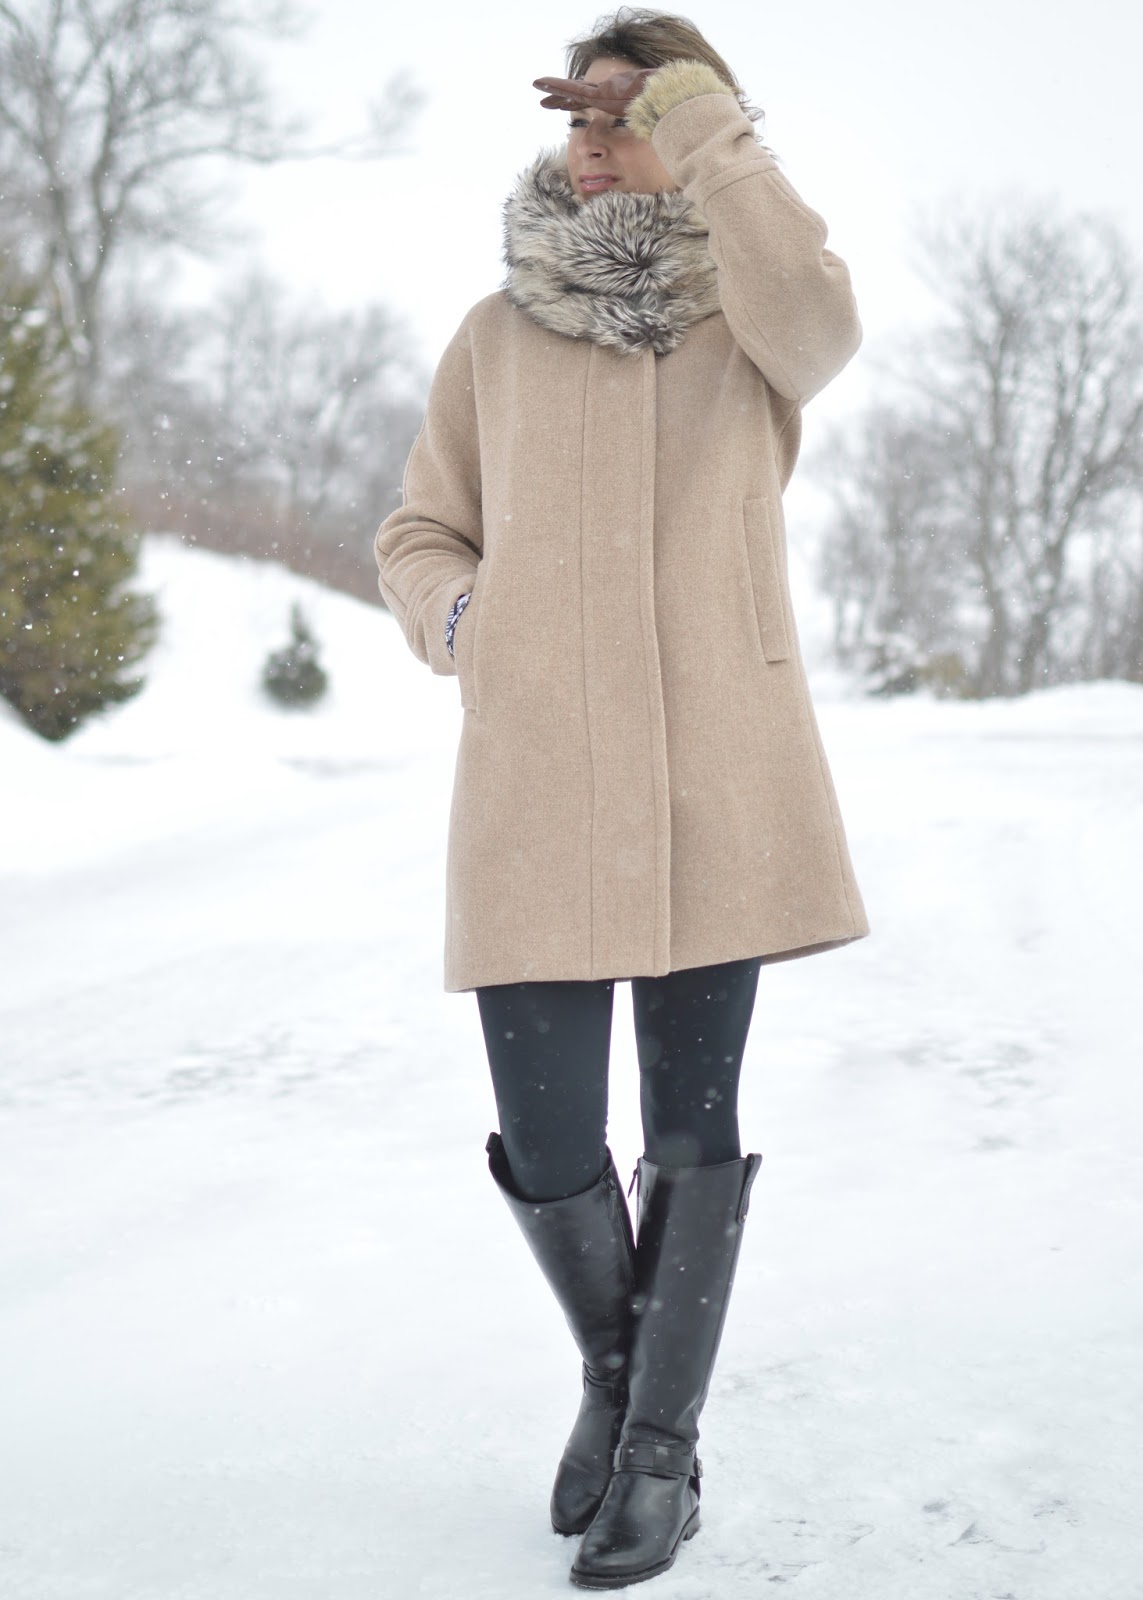 Coat and the Fur | Southern Style | a life + style blog